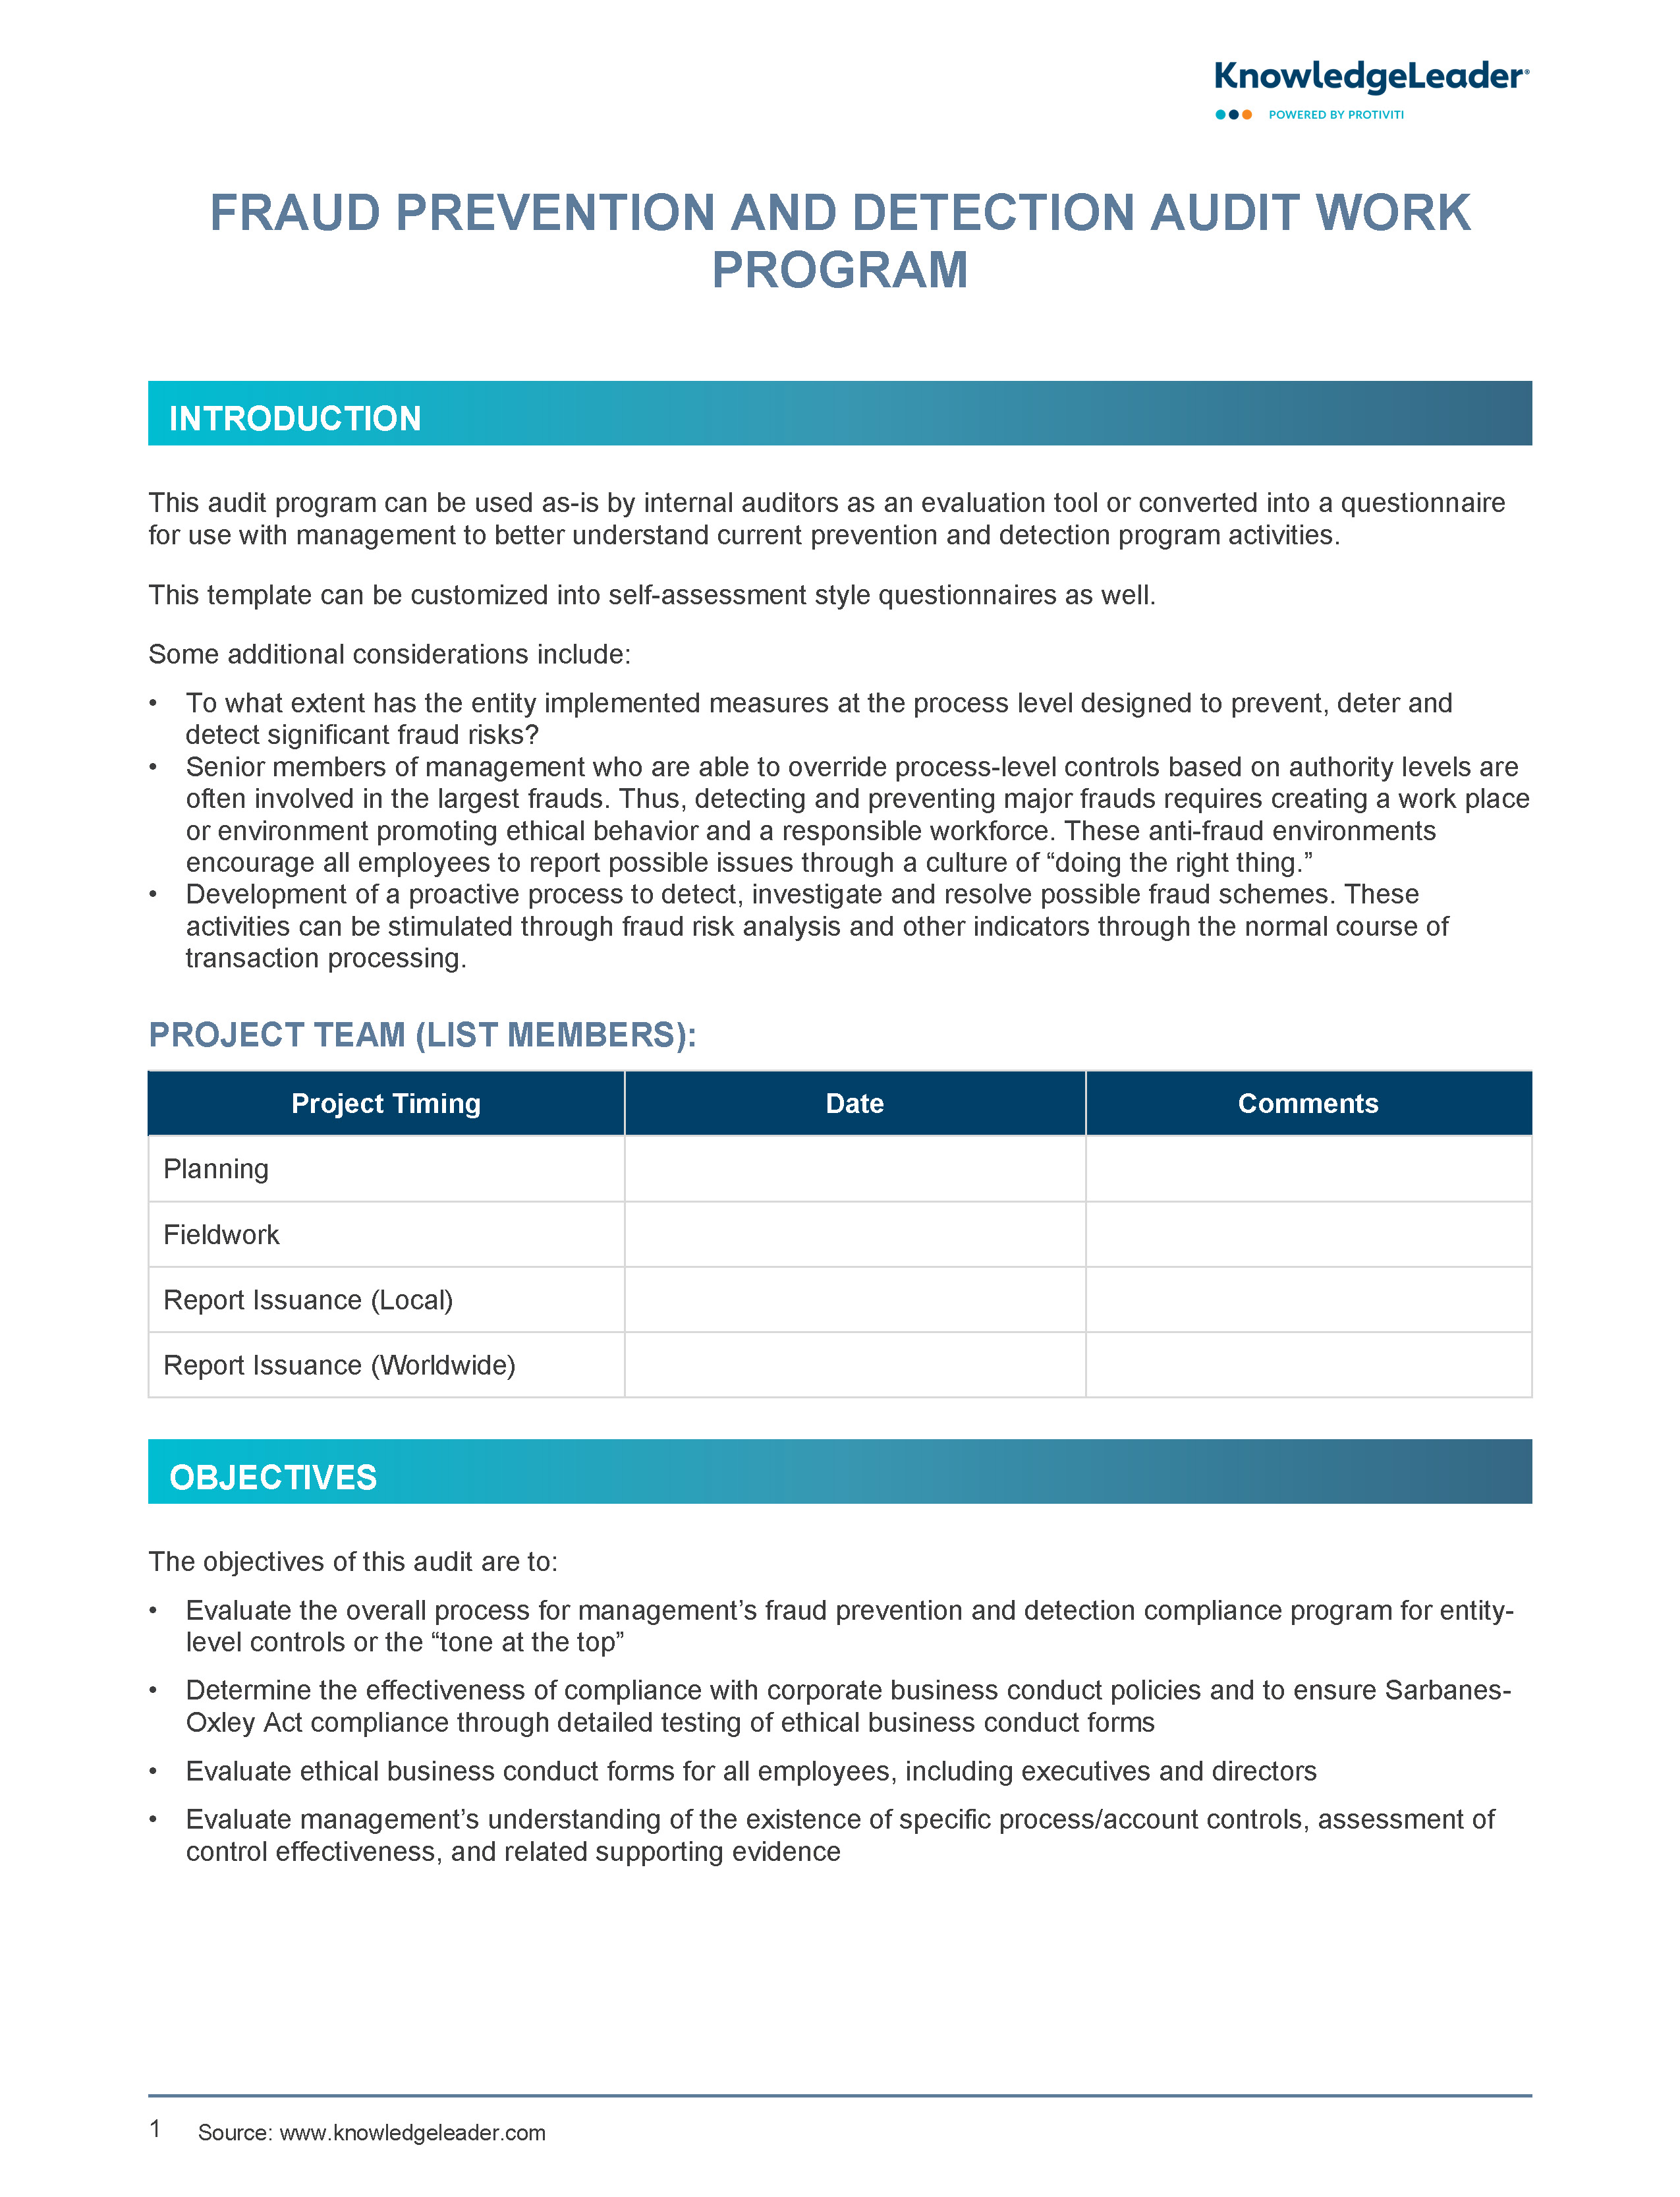 Screenshot of the first page of Fraud Prevention and Detection Audit Work Program